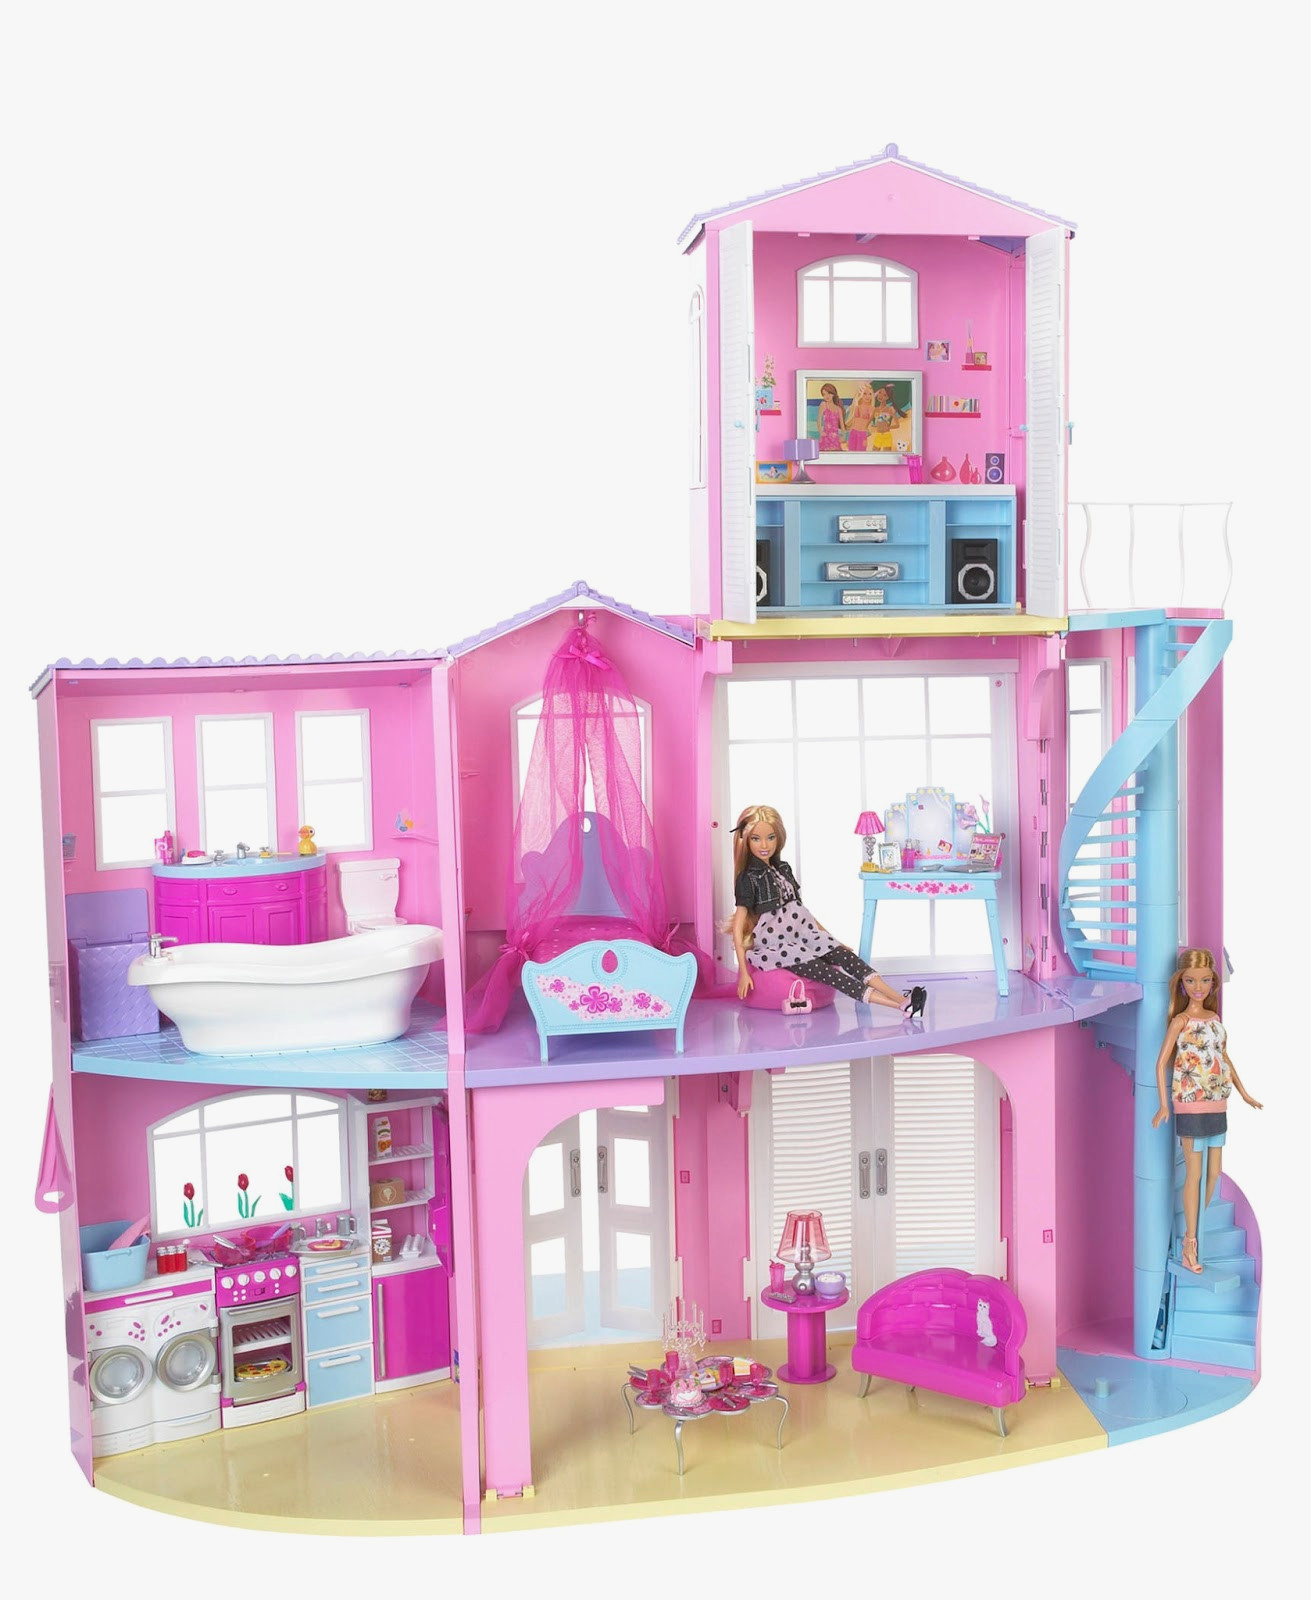 Picture Of Barbie Doll House Inspirational Hd Barbie - Barbie Dream House With Elevator , HD Wallpaper & Backgrounds